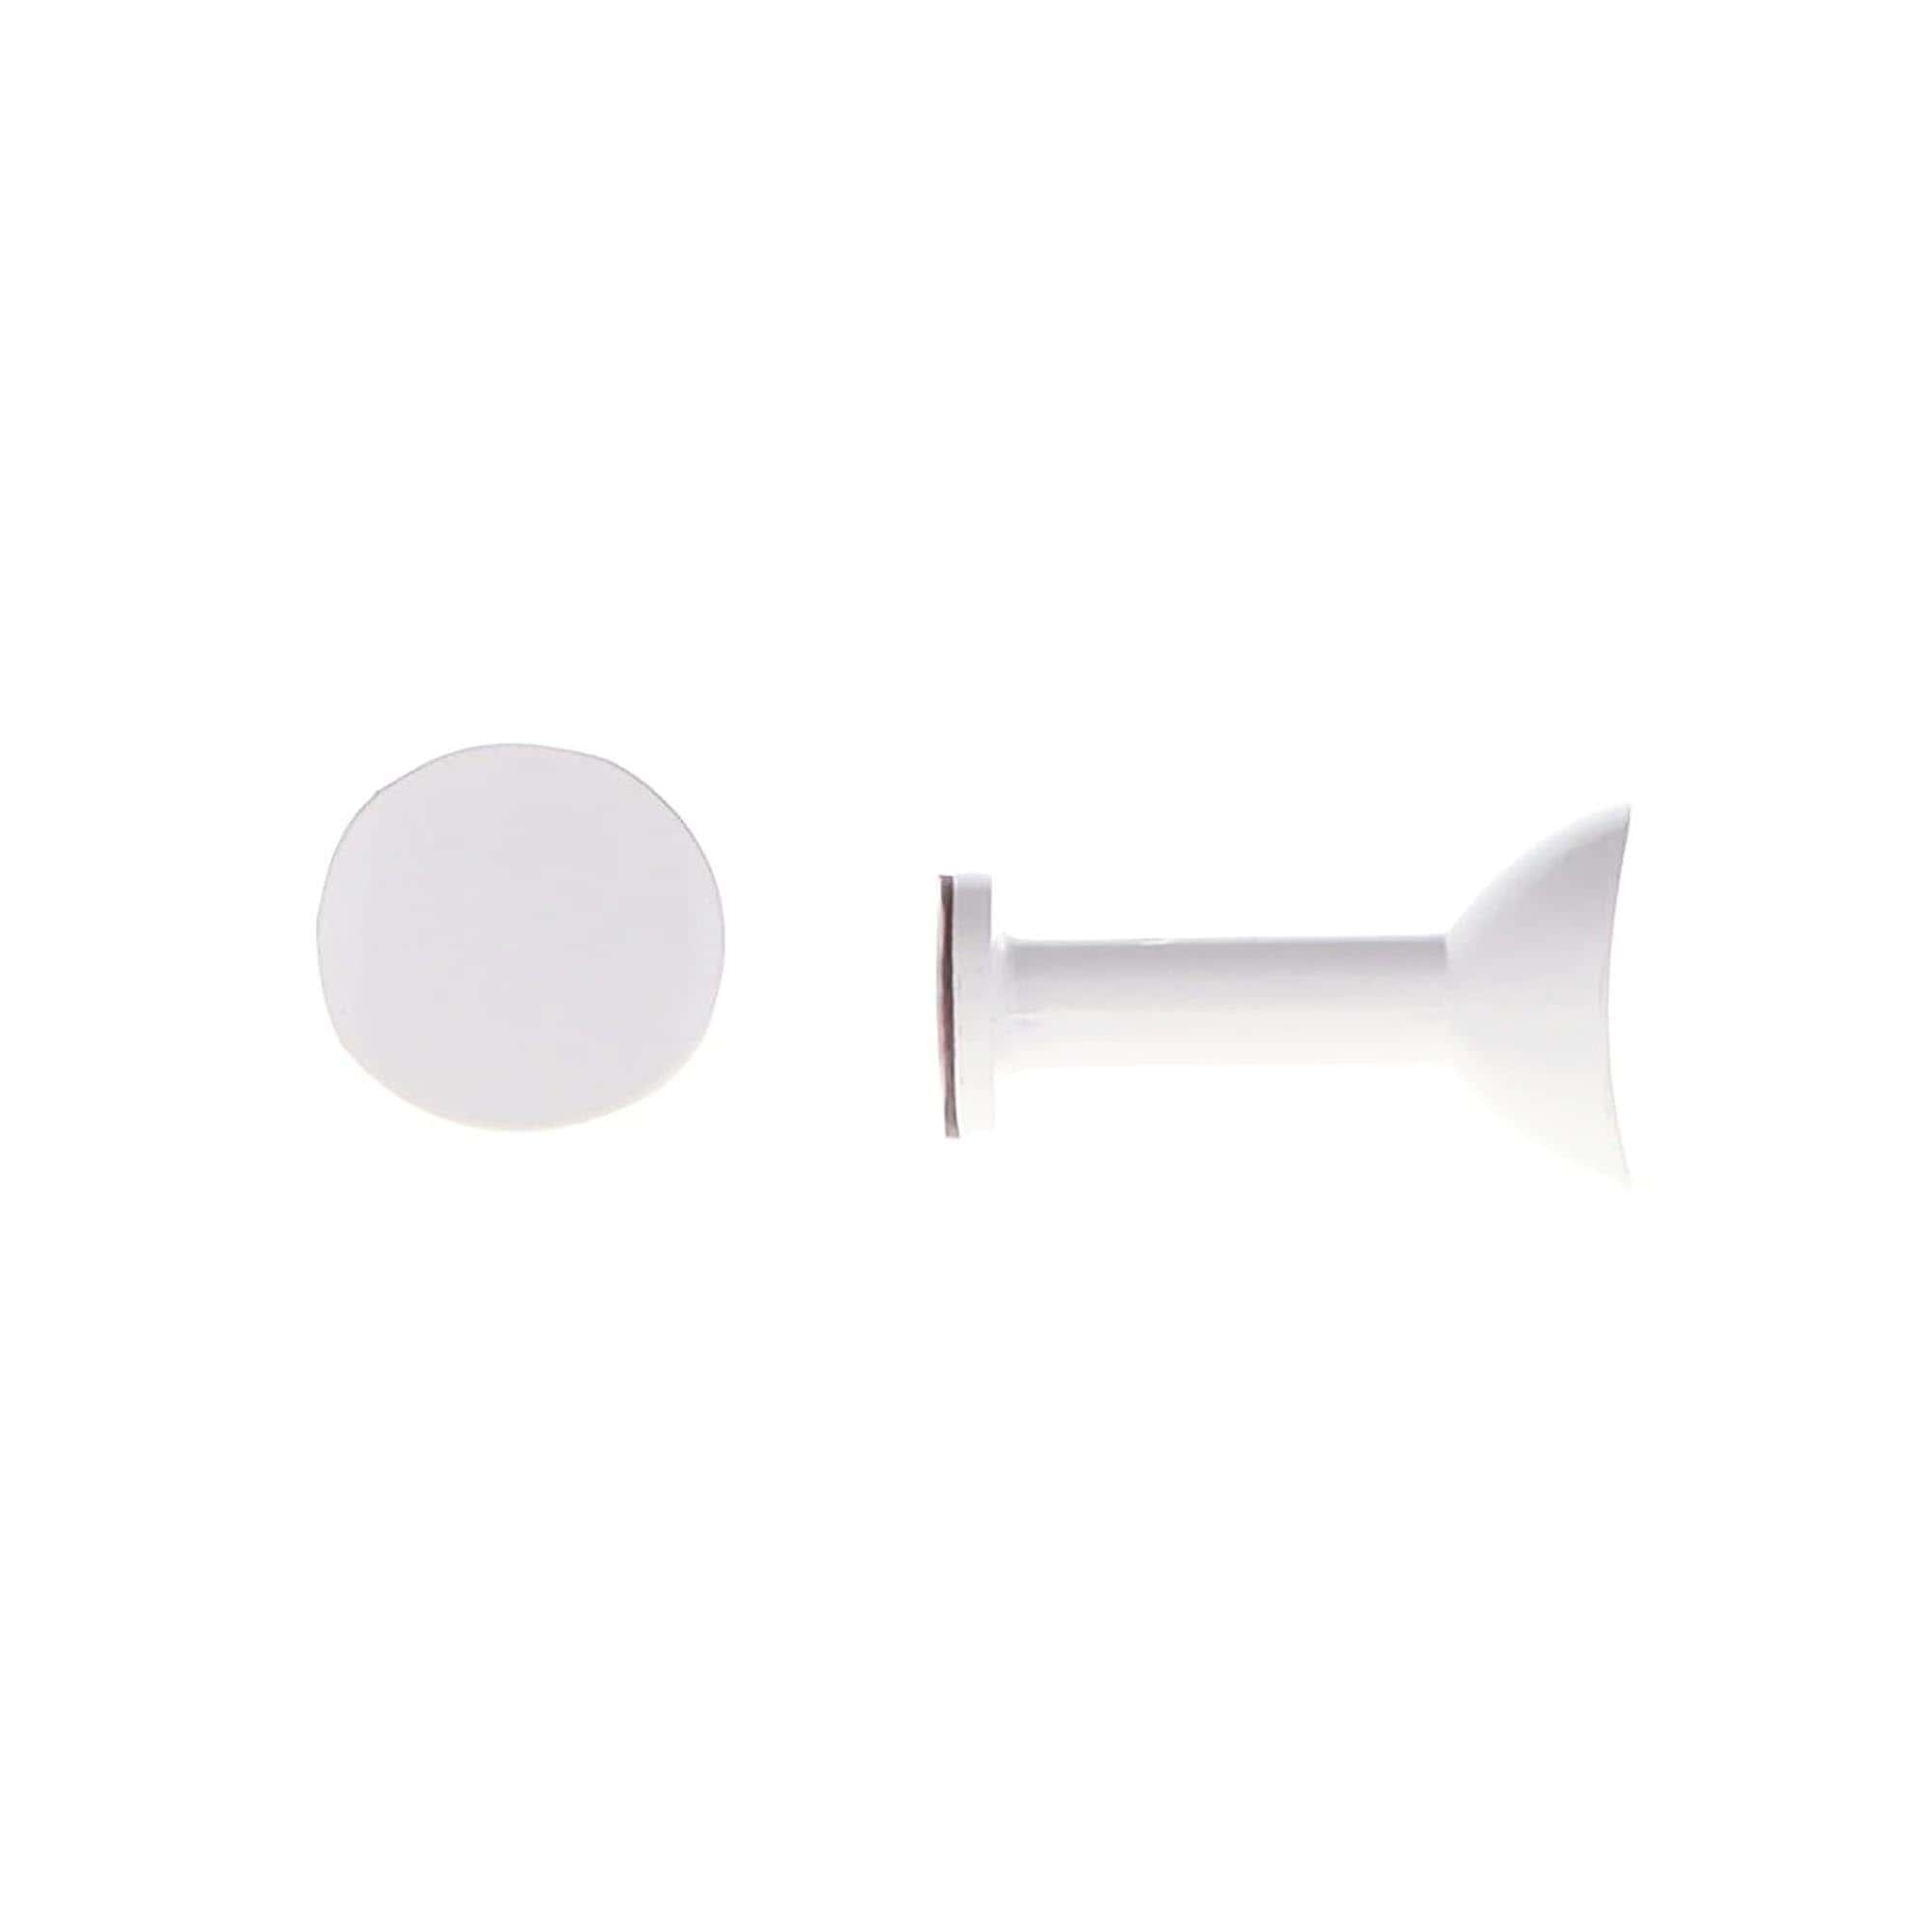 pair of metal hooks for curtain holdbacks in shiny white with round design